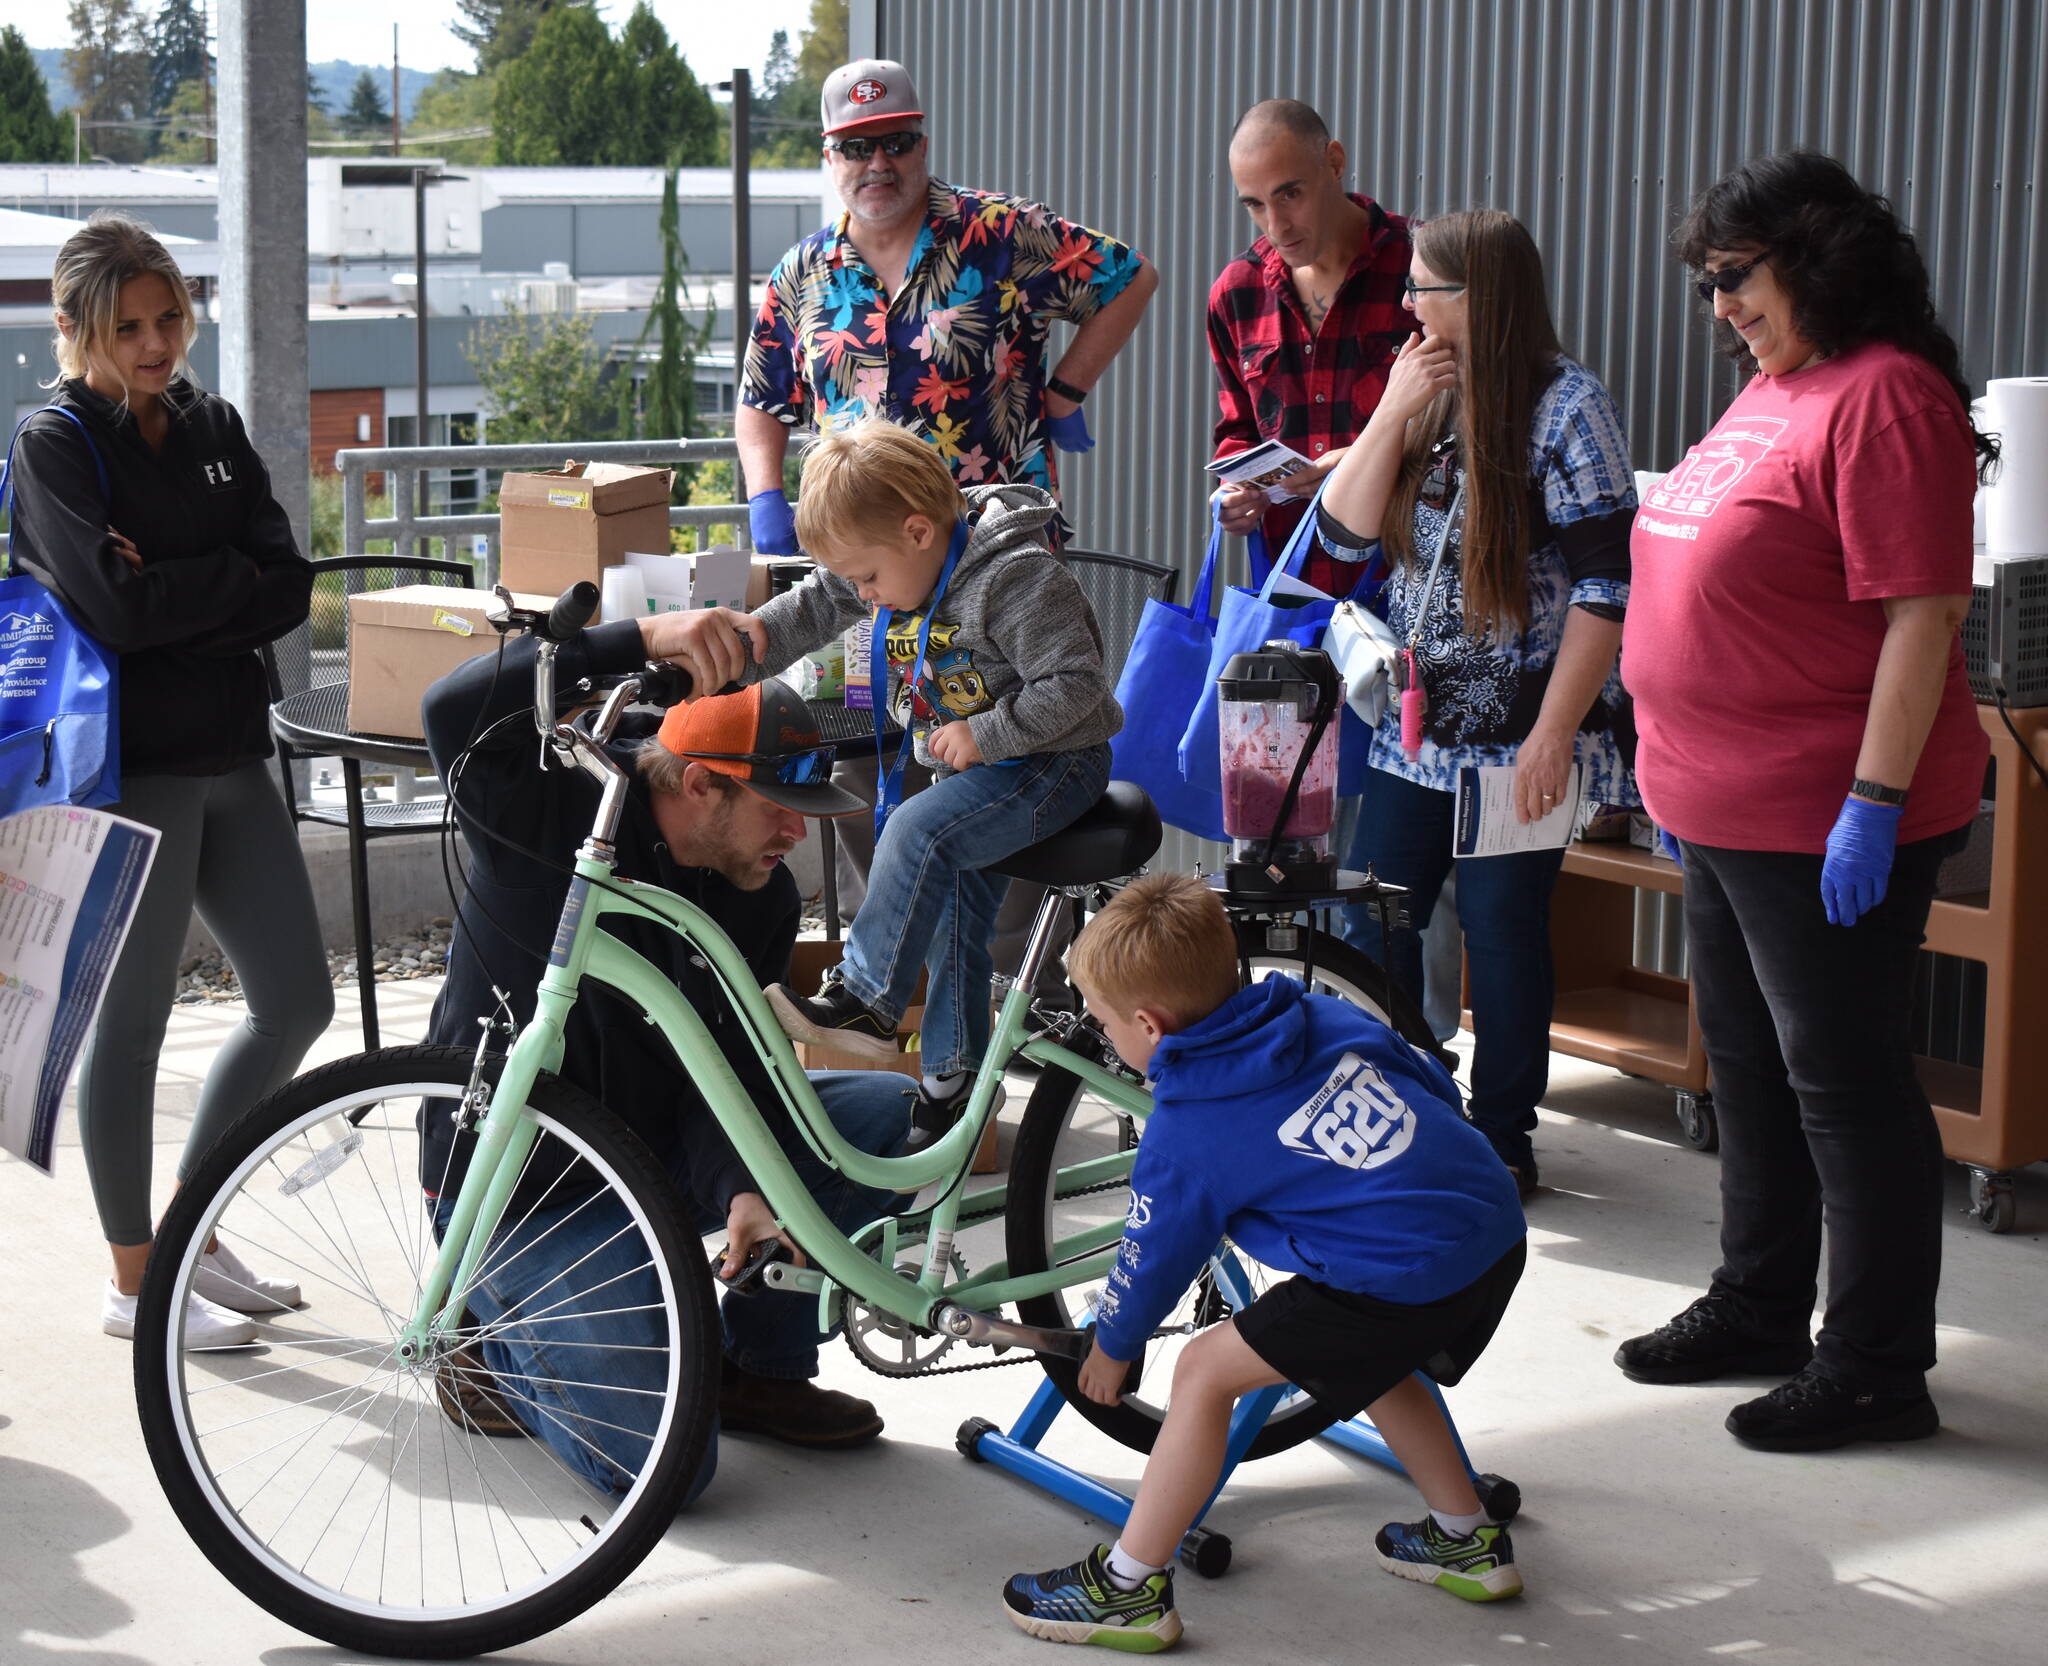 Wellness fair attendees ride a blender-powering bicycle at the 2022 Summit Pacific Peak Health and Wellness Fair. (Allen Leister / The Daily World File)